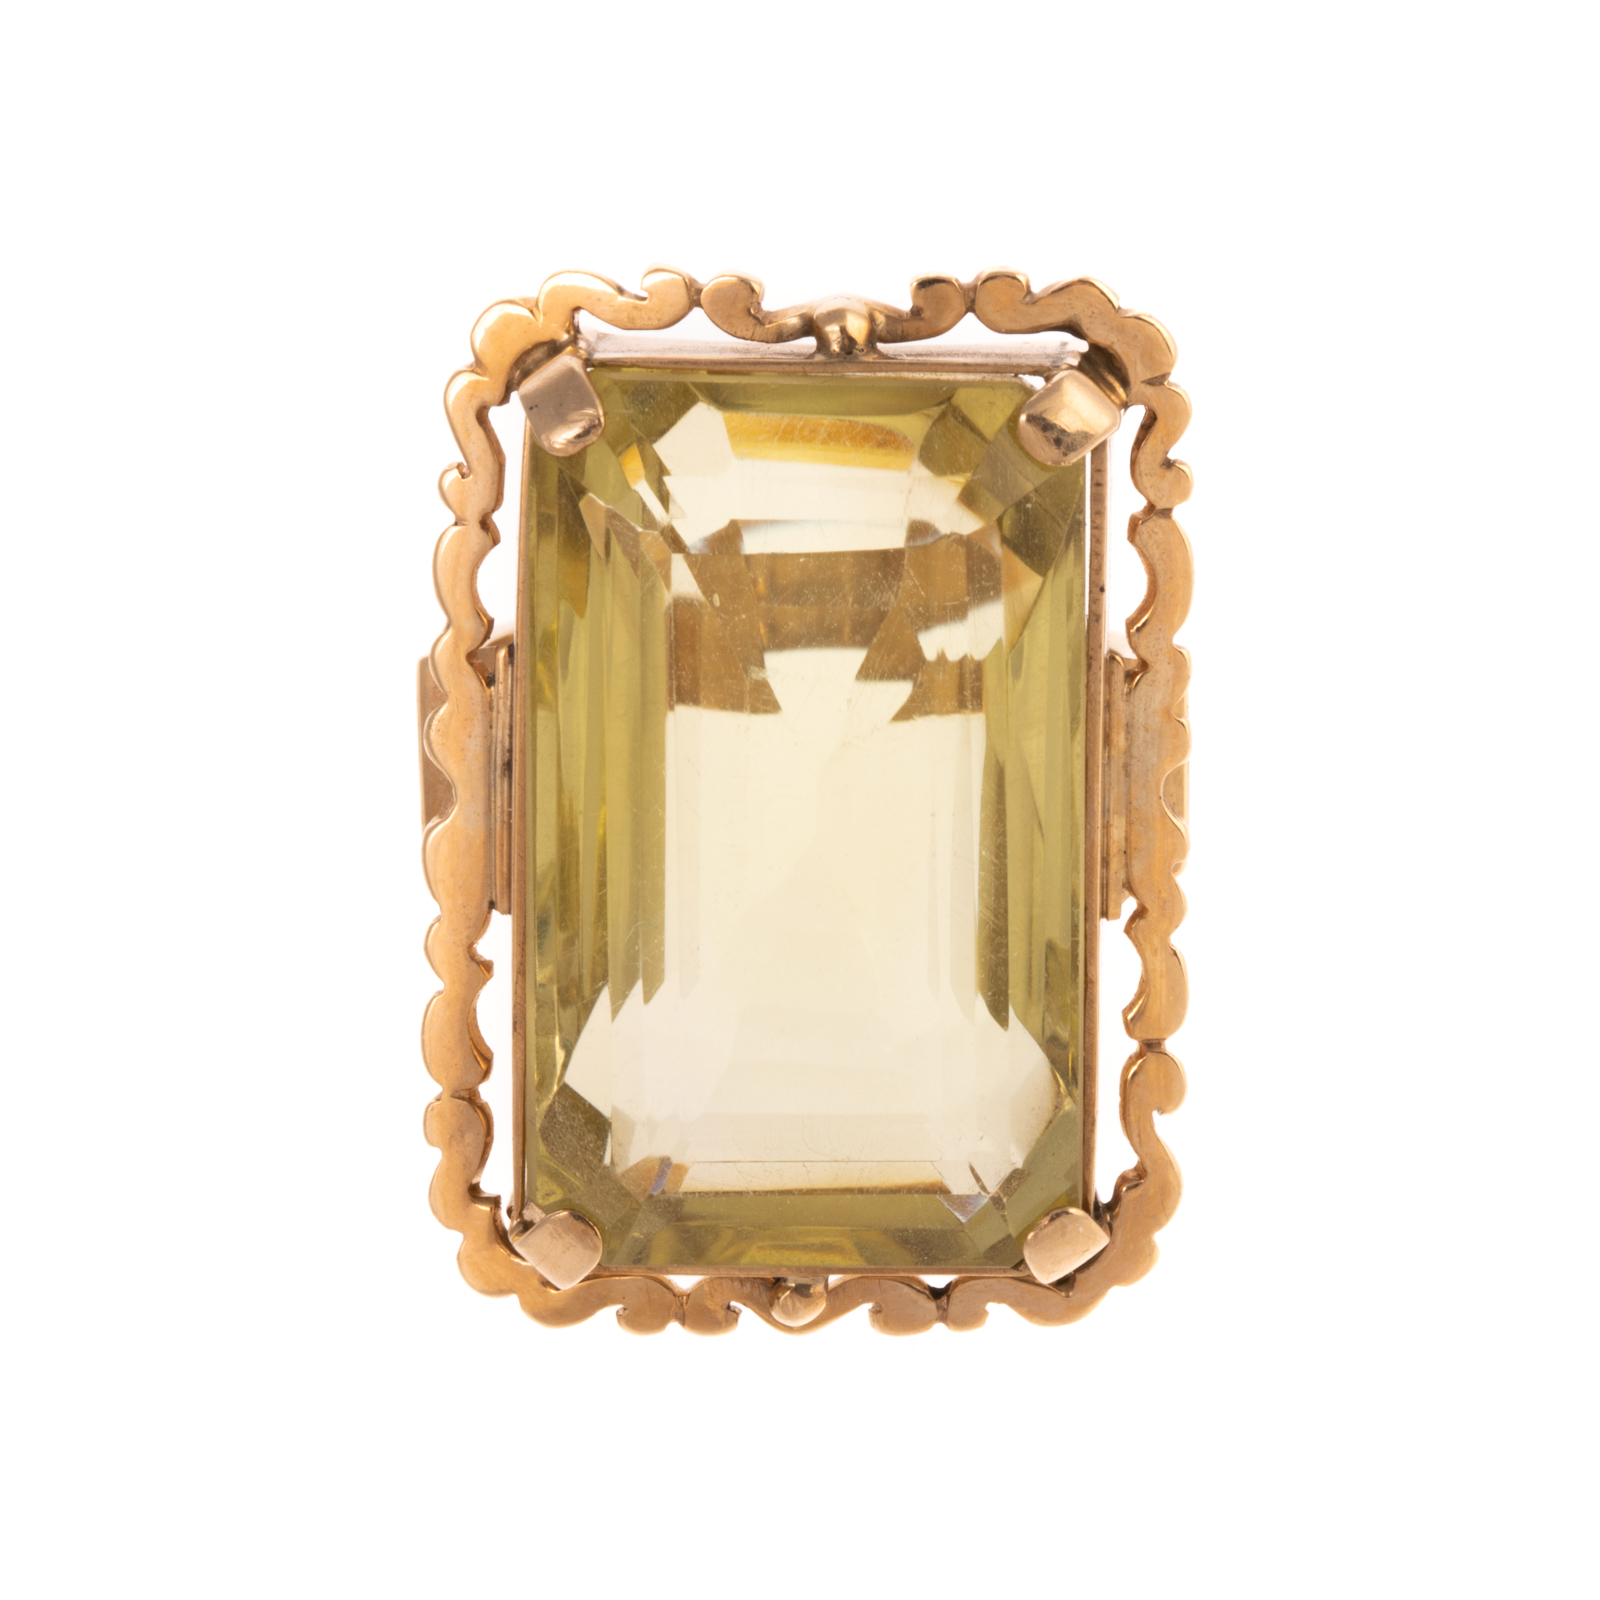 A CITRINE STATEMENT RING IN 14K